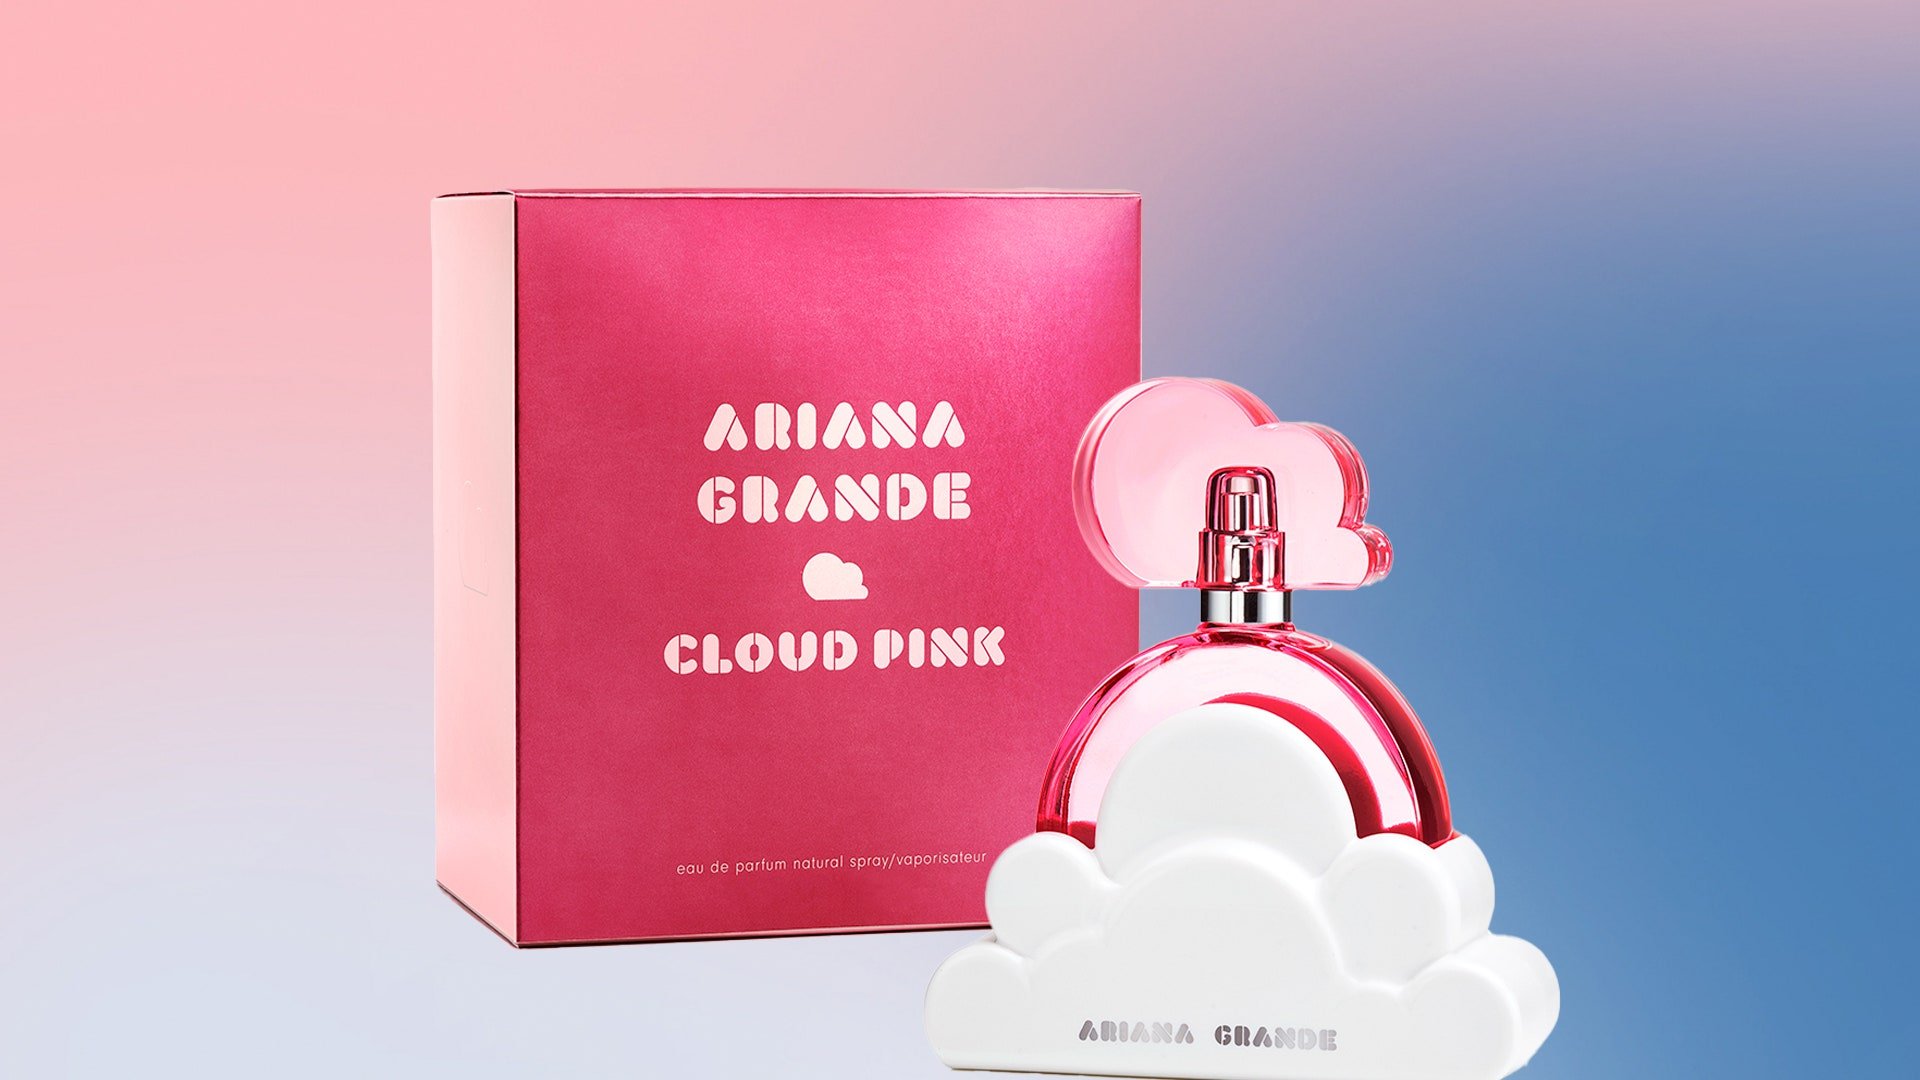 Ariana Grande CLOUD PINK review: This